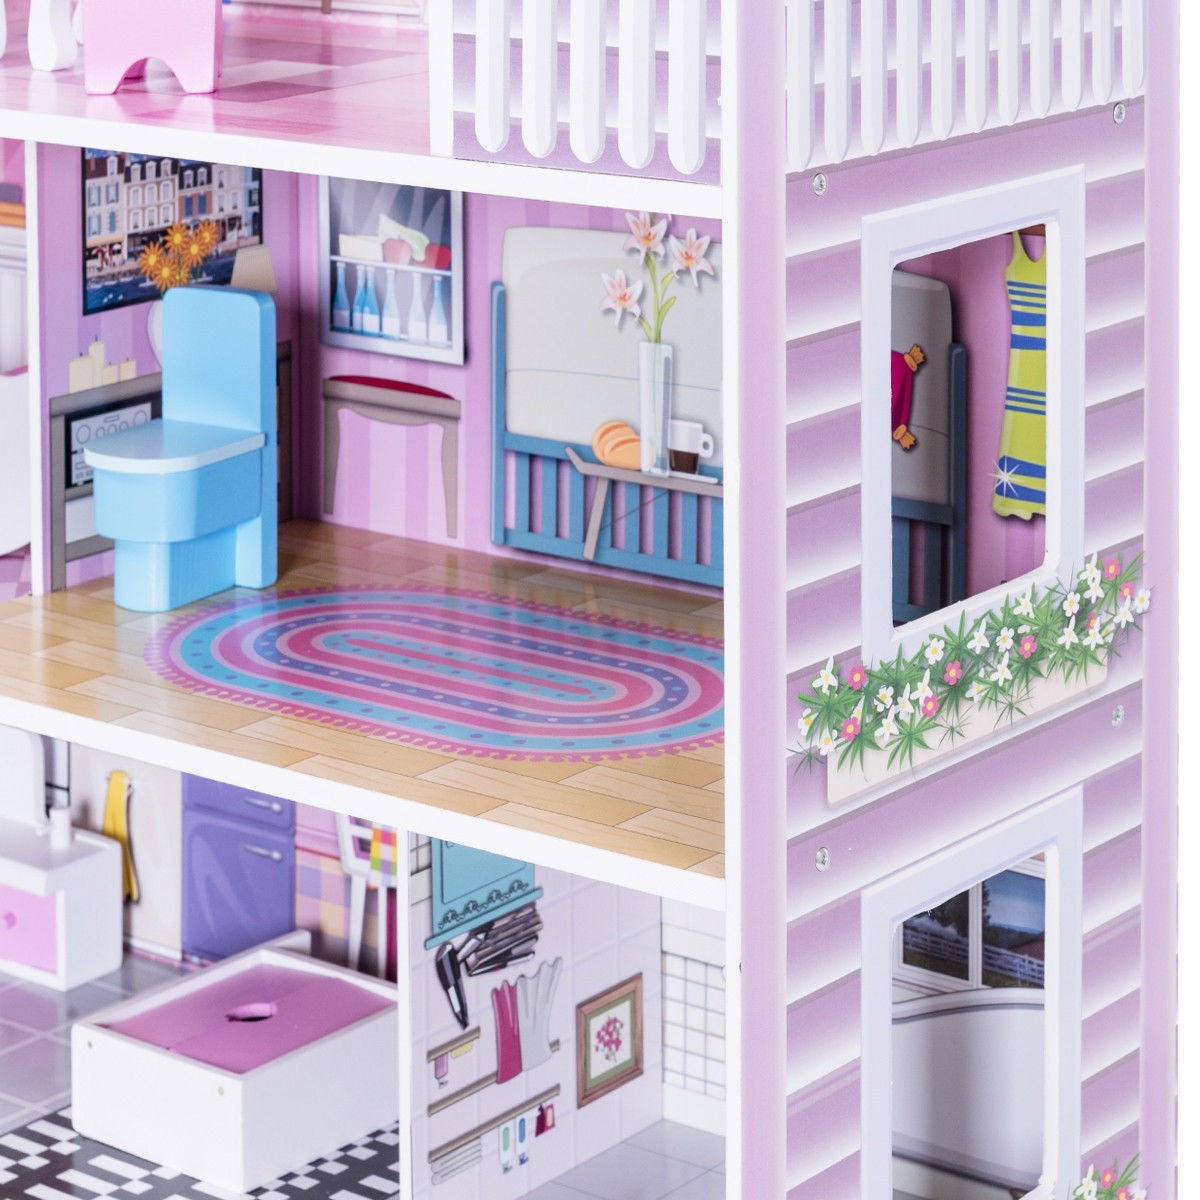 Dollhouse, Toy Family House with 13 pcs Furniture